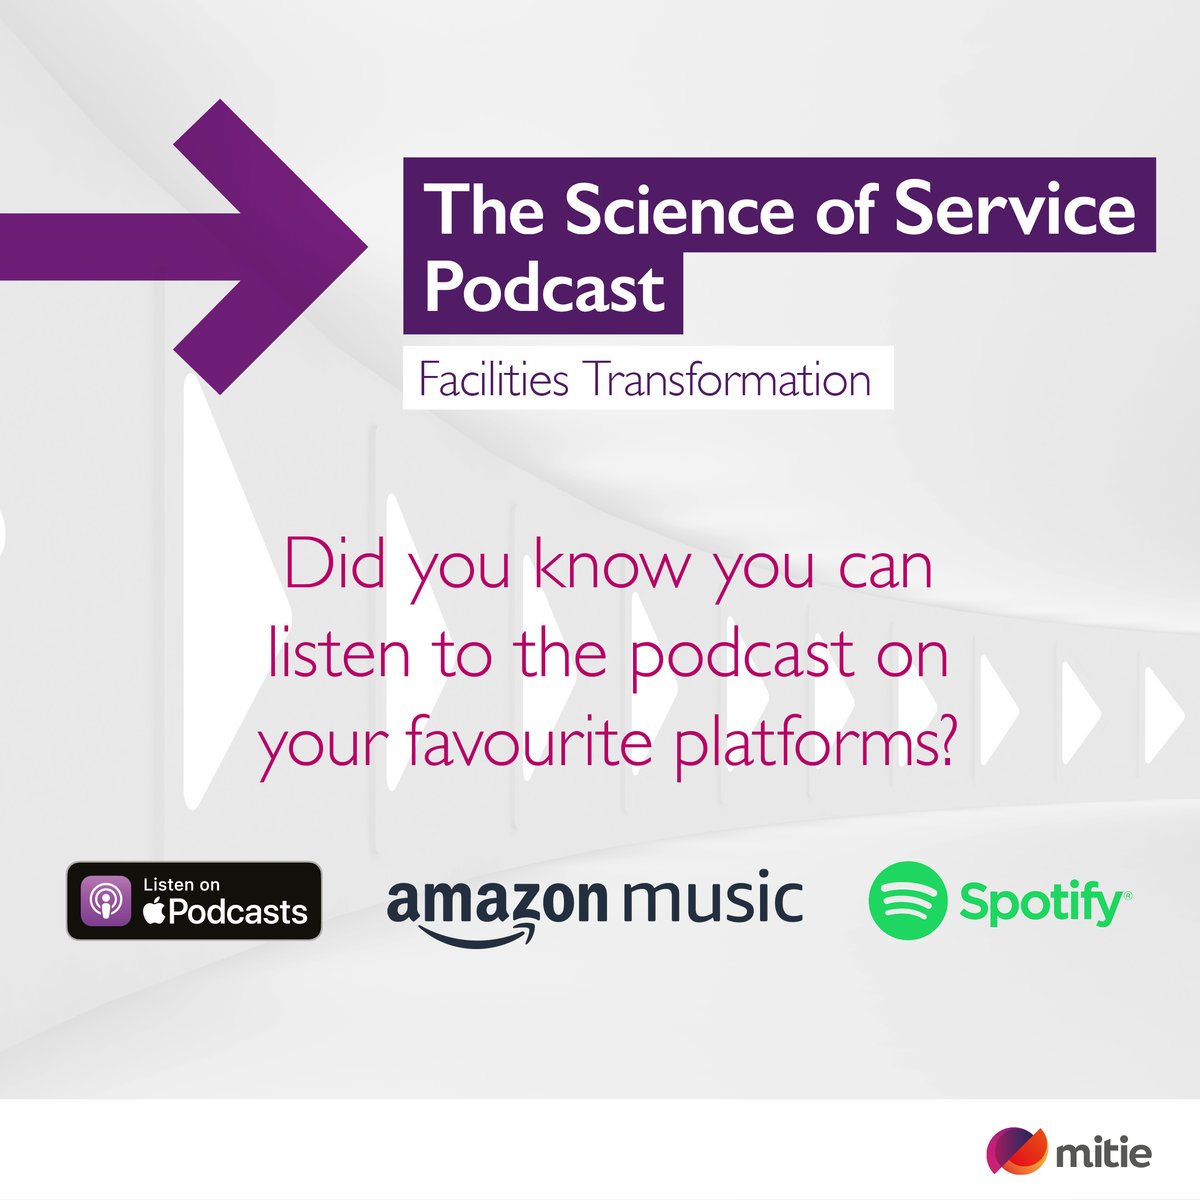 Did you know the #ScienceOfService podcast is available to listen to on your favourite streaming platforms? Don't miss our new episodes: Spotify: hubs.ly/Q02sdw8n0 Apple Podcasts: hubs.ly/Q02sdw800 Amazon Music: hubs.ly/Q02sdwtm0 #FMPodcast